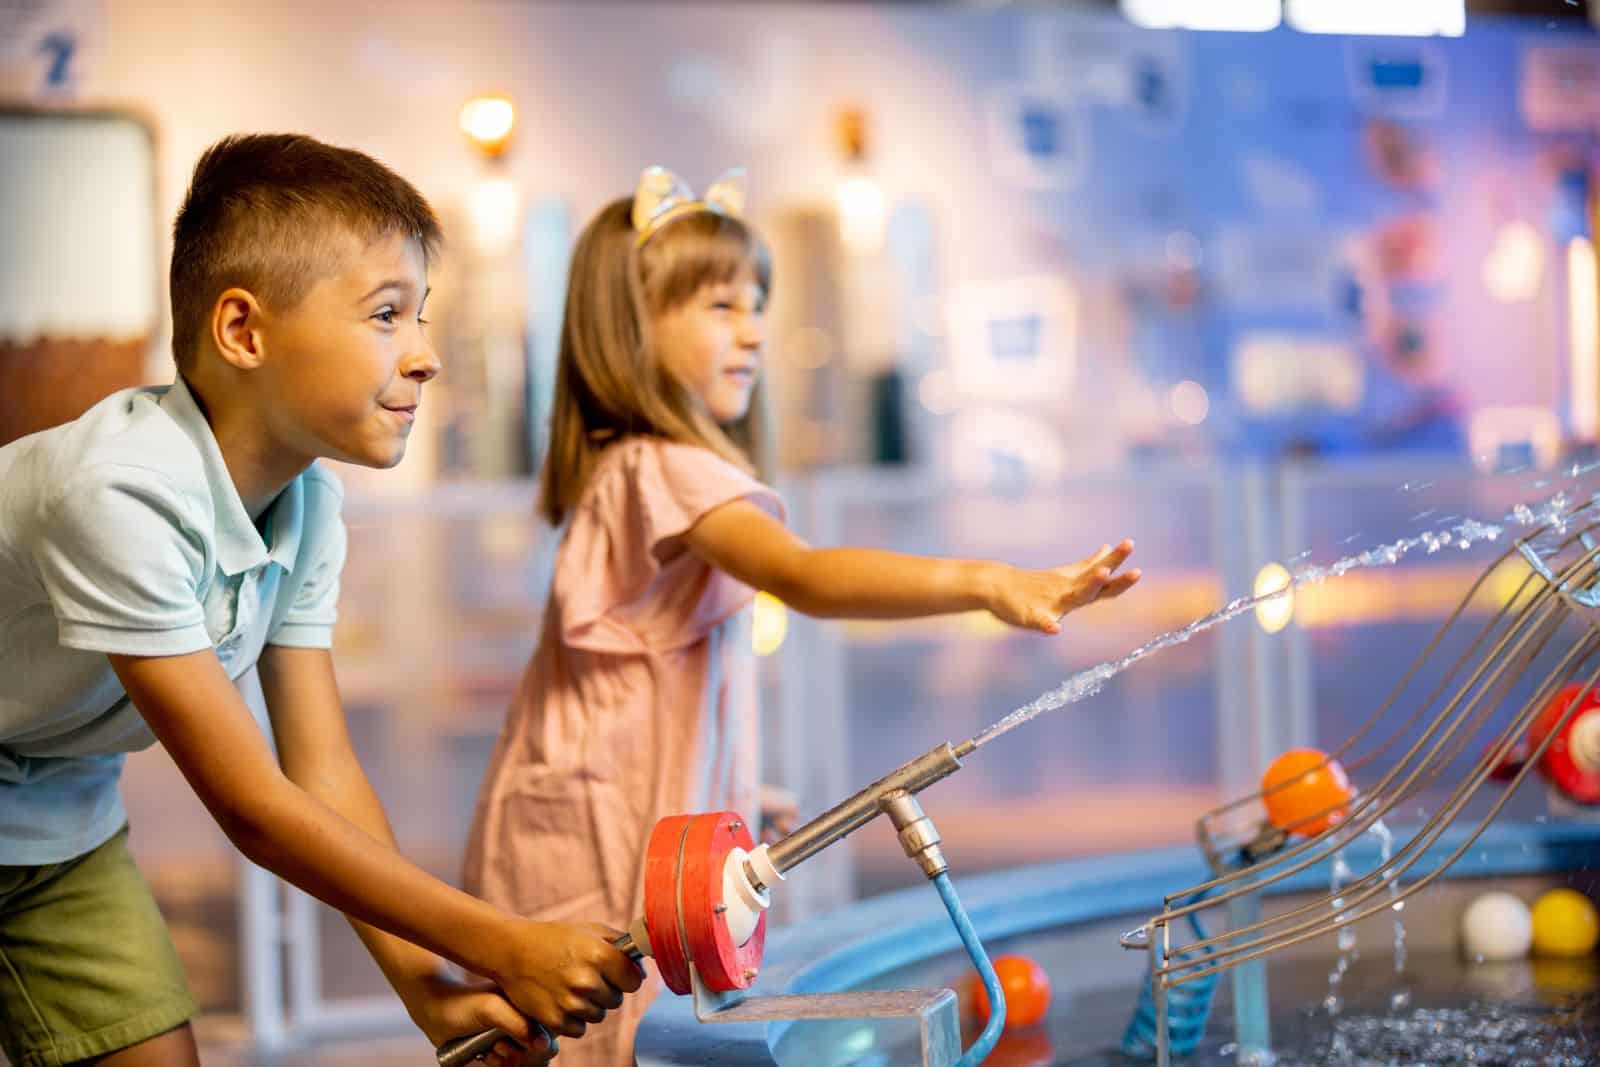 <p class="wp-caption-text">Image Credit: Shutterstock / RossHelen</p>  <p>Spark your curiosity and imagination at the Adventure Science Center. With interactive exhibits, hands-on activities, and planetarium shows, it’s a fun and educational destination for visitors of all ages.</p>